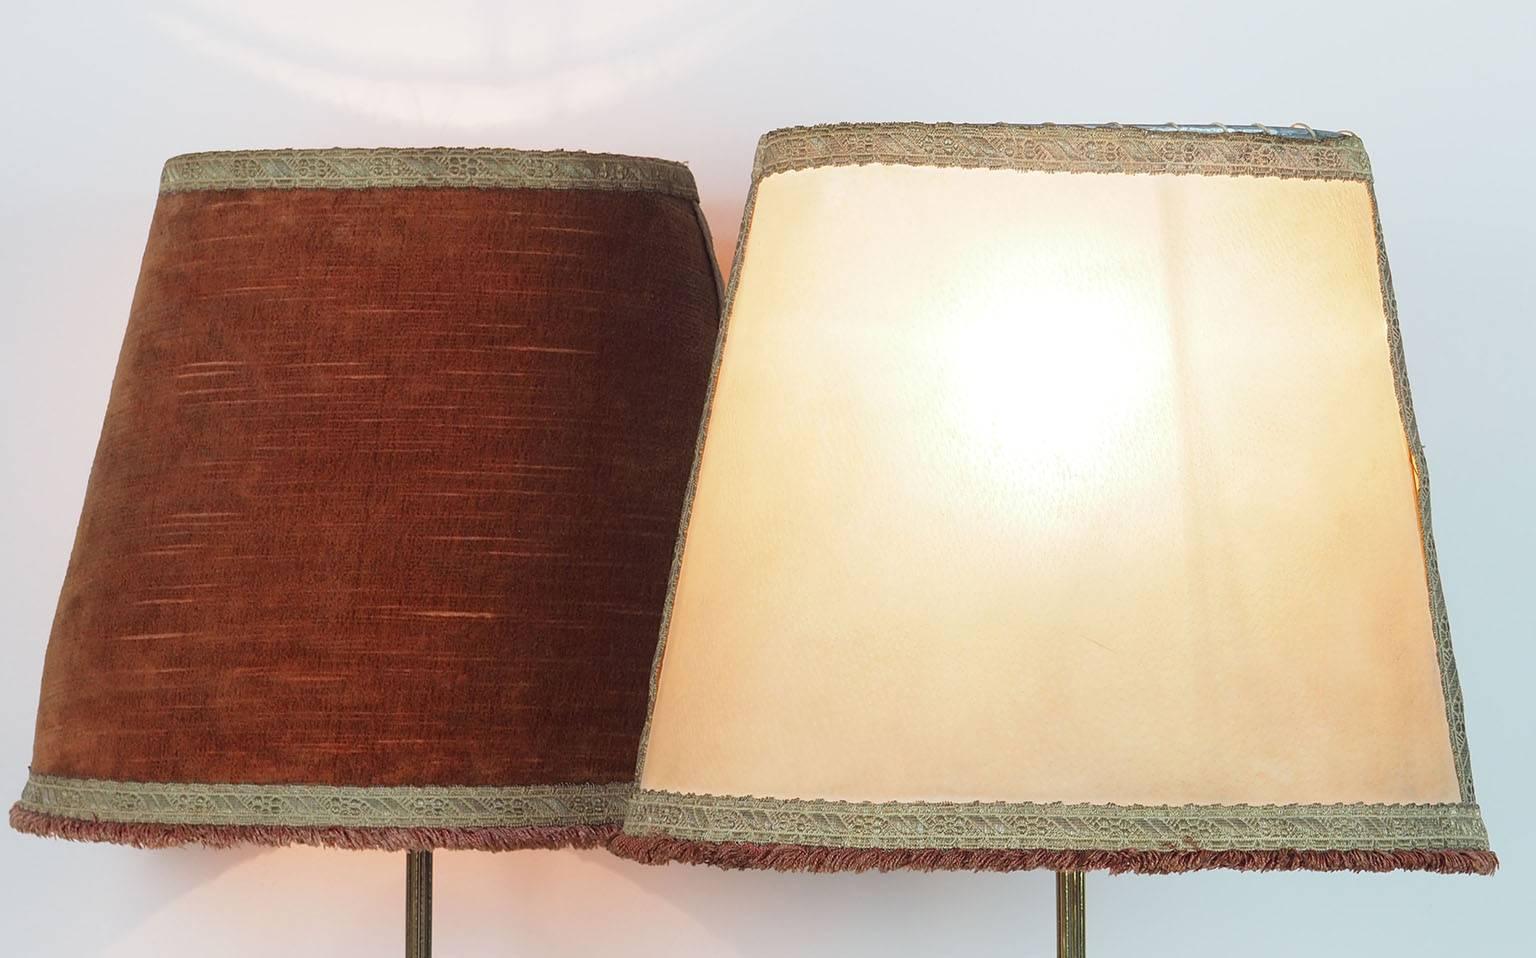 Large ( height 75 cm) couple of  brass table lamps with original Oval lampshades manufactured by Chiarini in 1950s.
The original Bifronte parchment and velvet lampshade has a particular elliptical shape.
They can be easily re done.
The thinness of